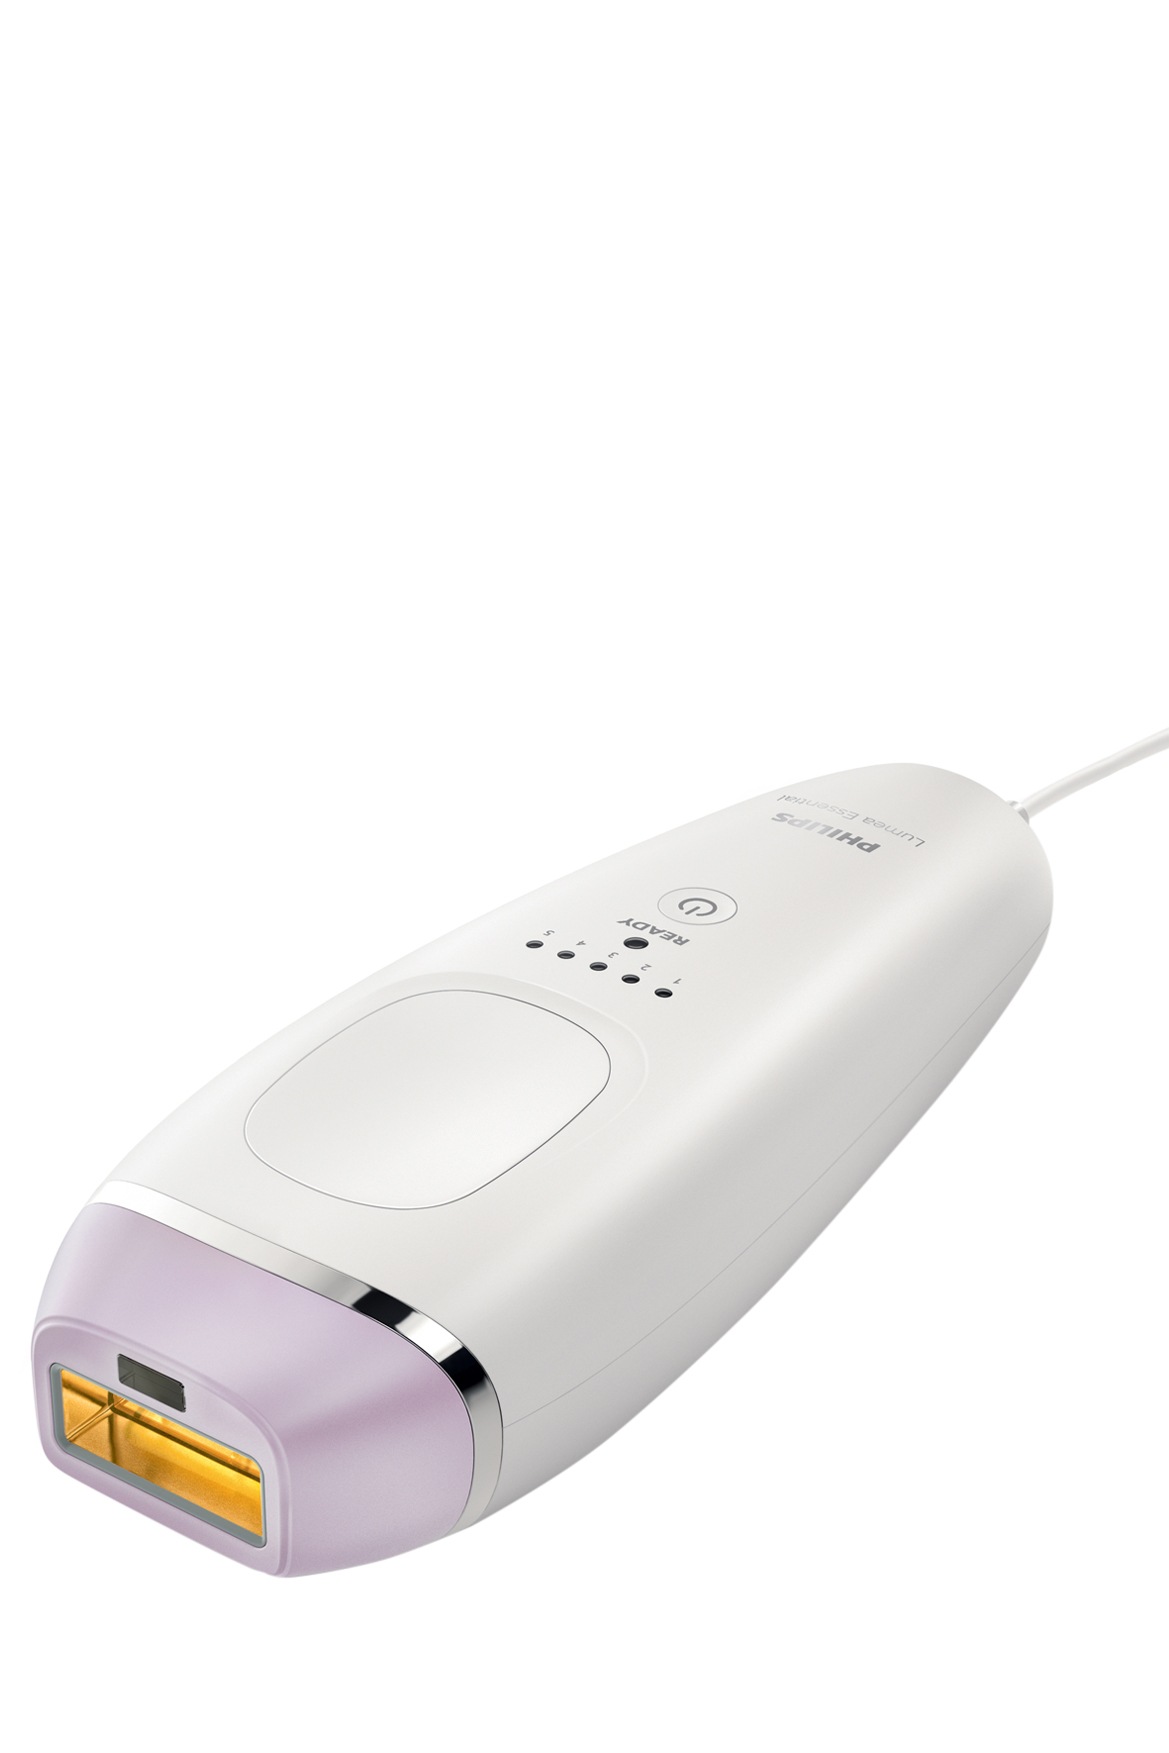 Philips Lumea Essential IPL Hair Removal System BRI863 Myer Online